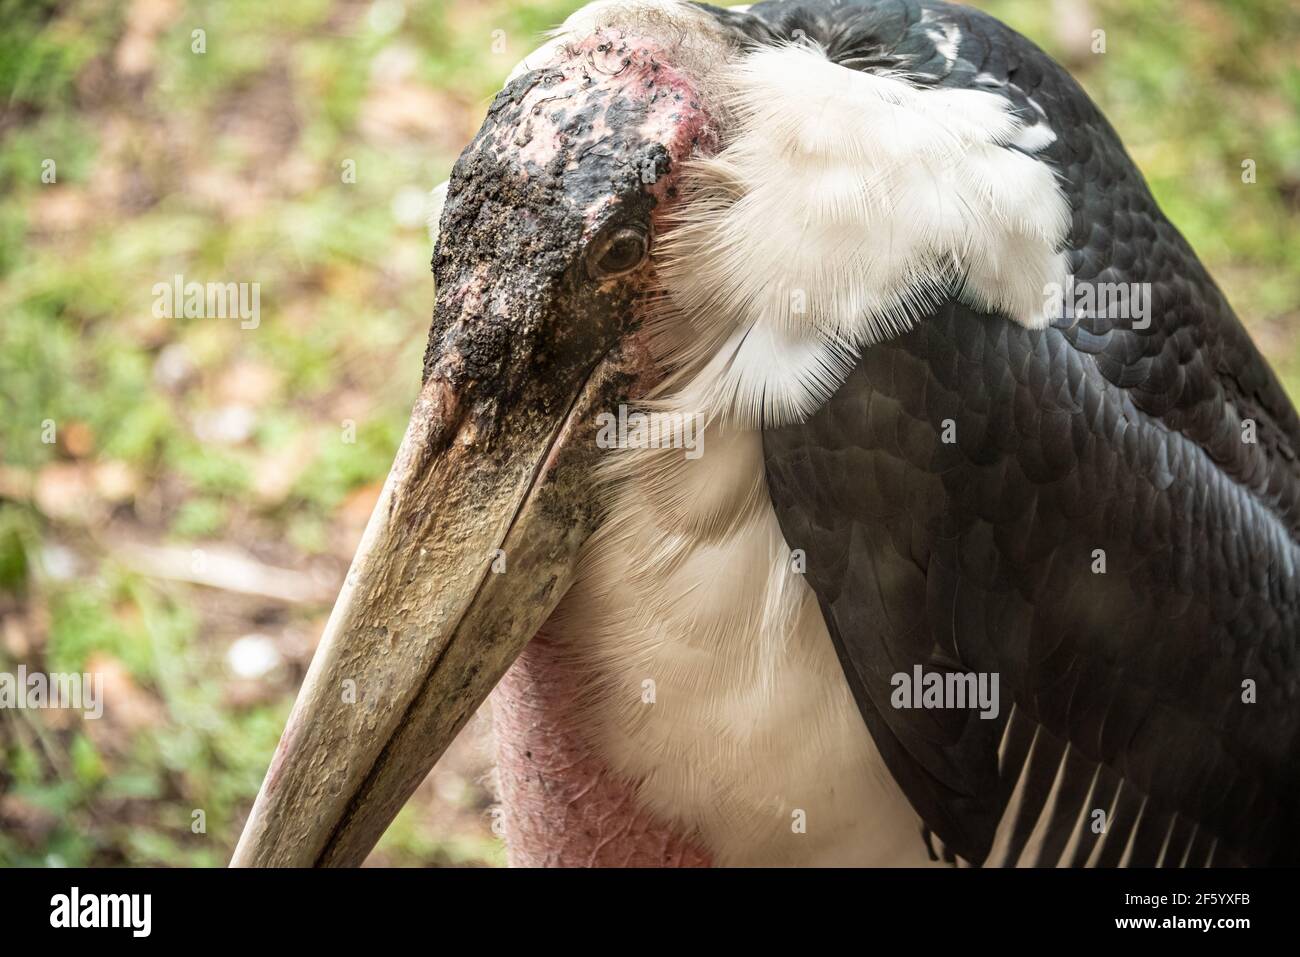 Close-up of South African Marabou stork (Leptoptilos crumenifer) at the St. Augustine Alligator Farm Zoological Park in St. Augustine, Florida. (USA) Stock Photo